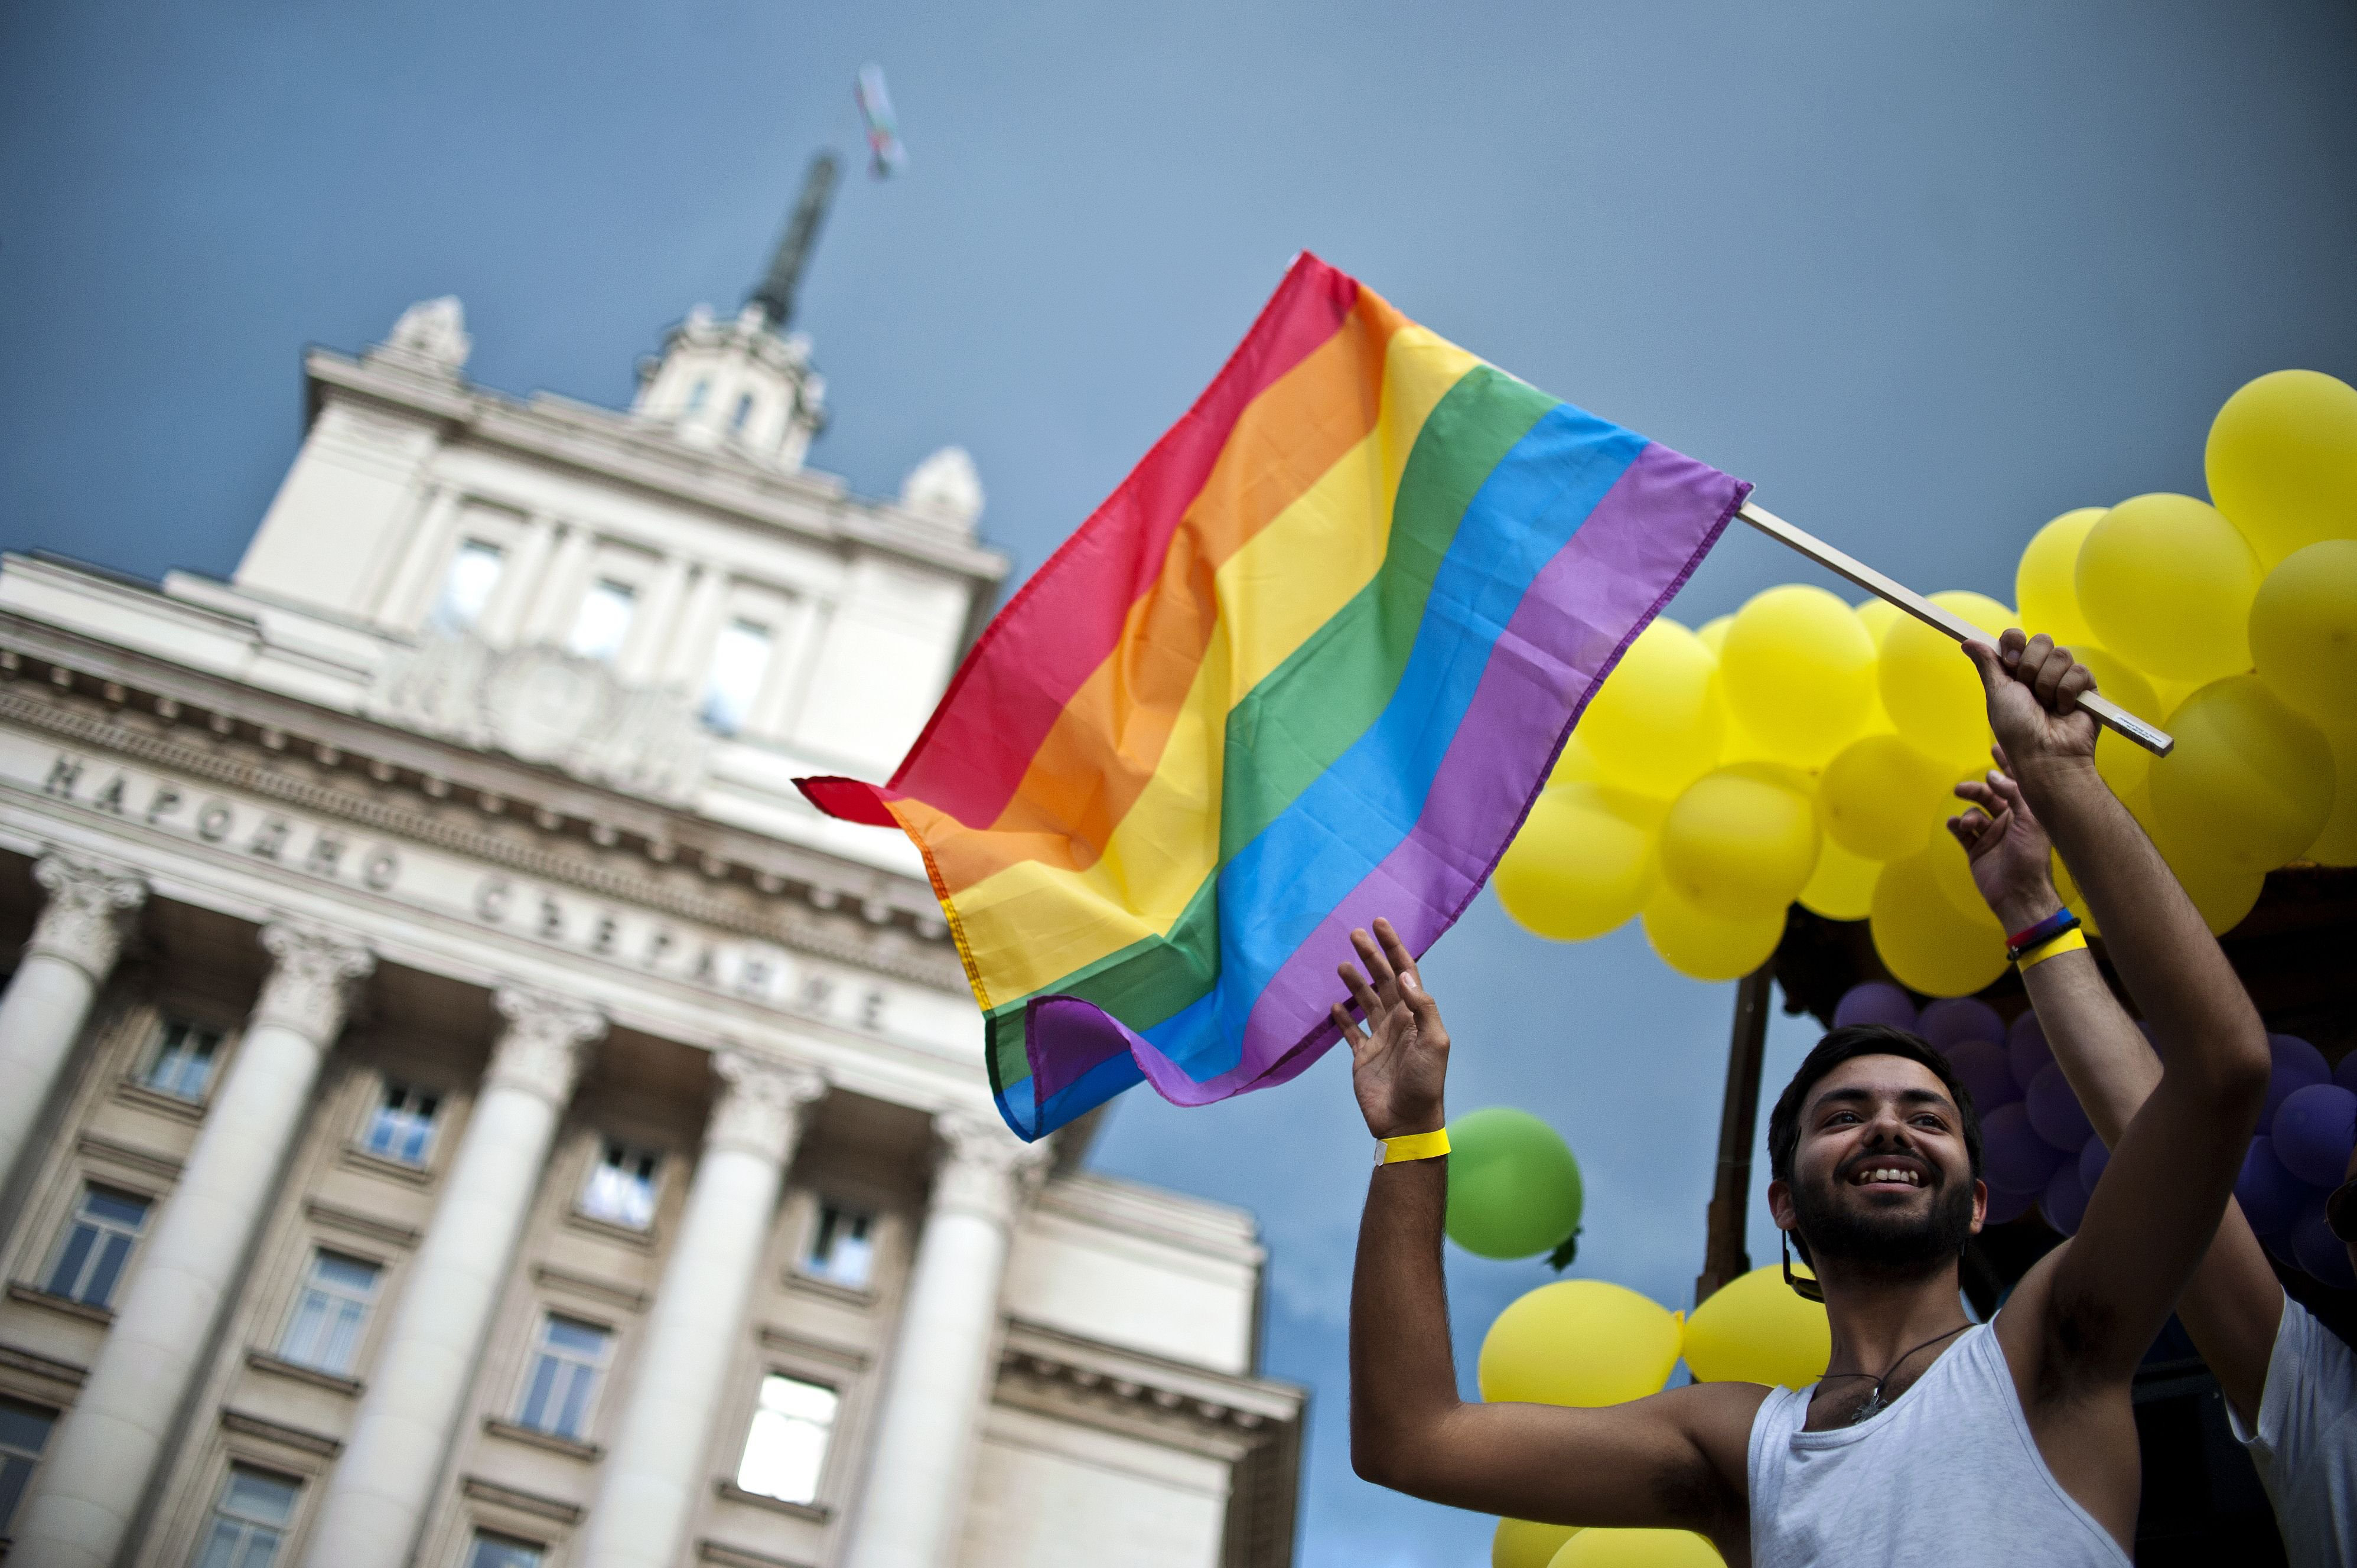 A man waves the Rainbow flag on a truck during the annual Gay Pride parade in central Sofia, Bulgaria on June 27, 2015.